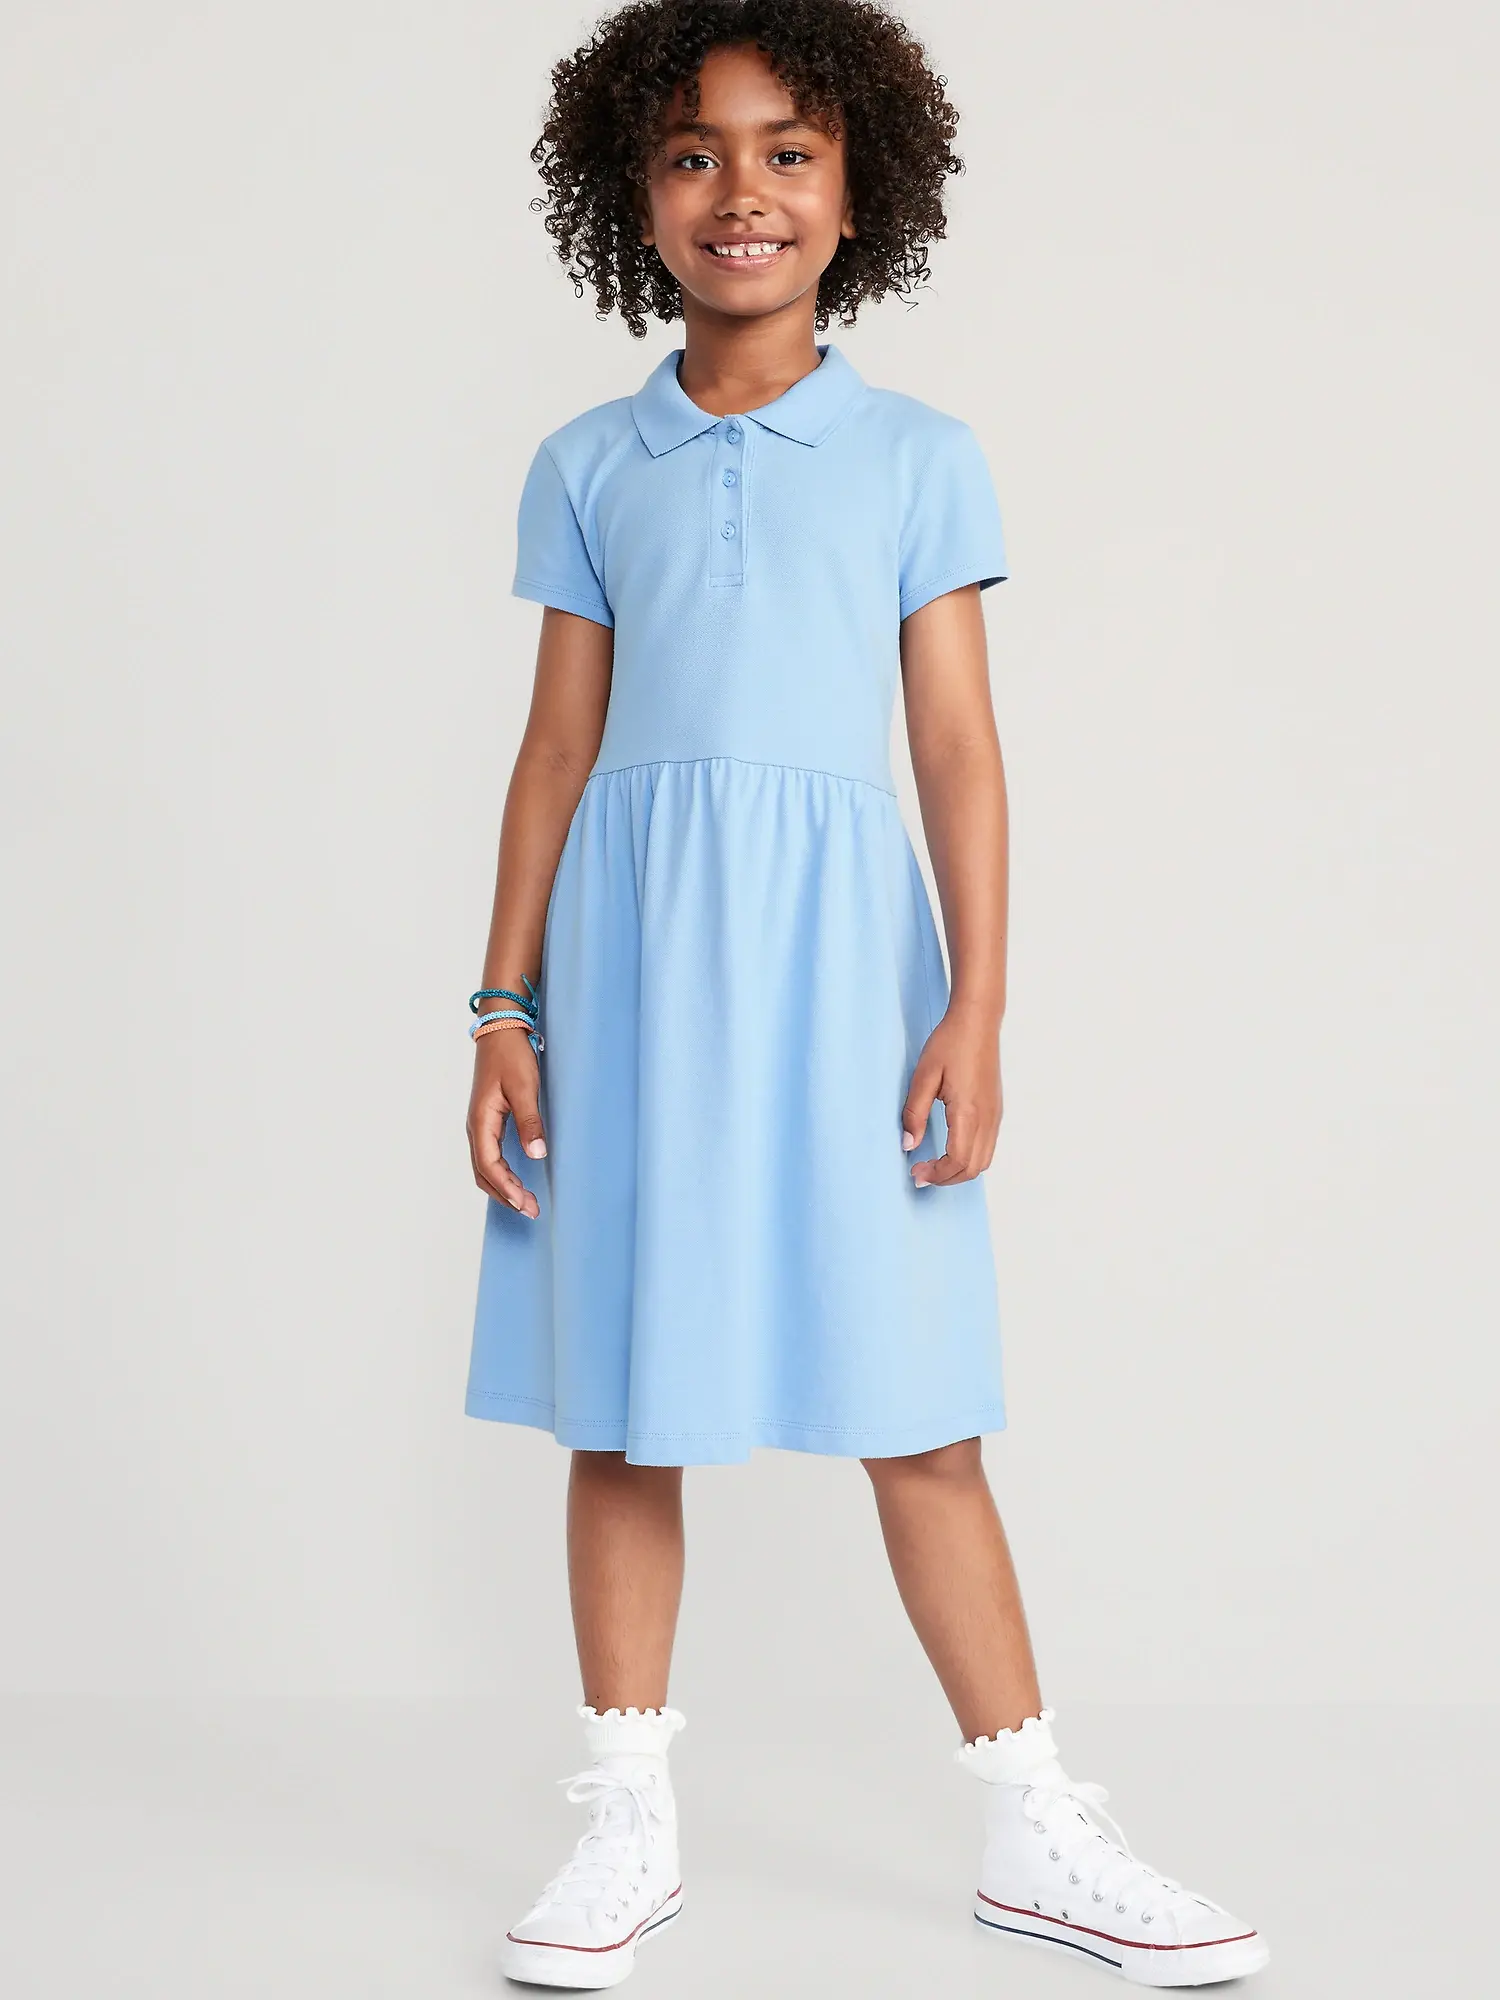 Old Navy School Uniform Fit & Flare Pique Polo Dress for Girls blue. 1